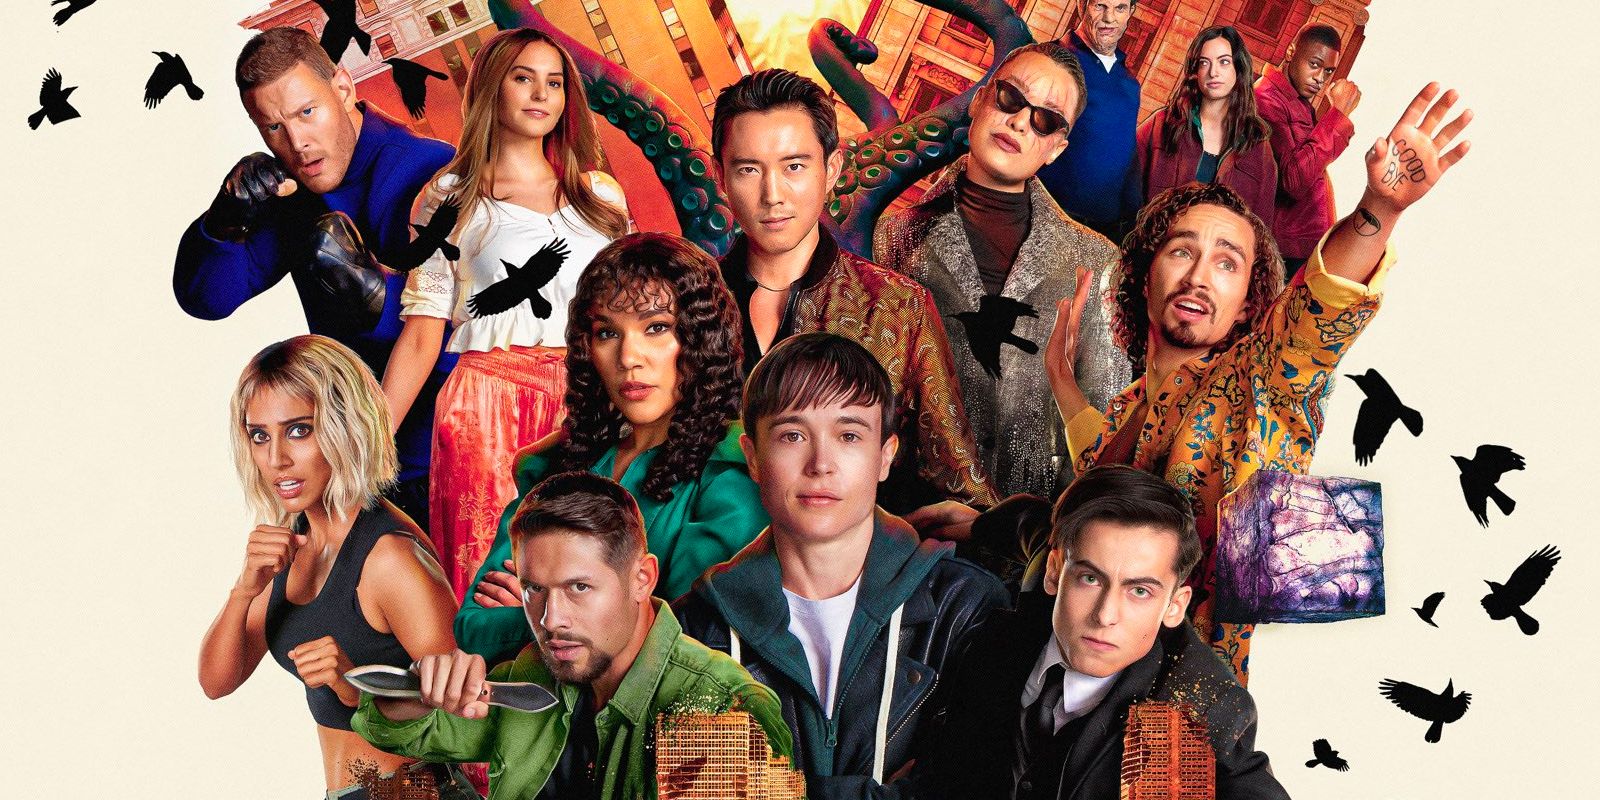 the umbrella academy cast posing together for a Season 3 poster